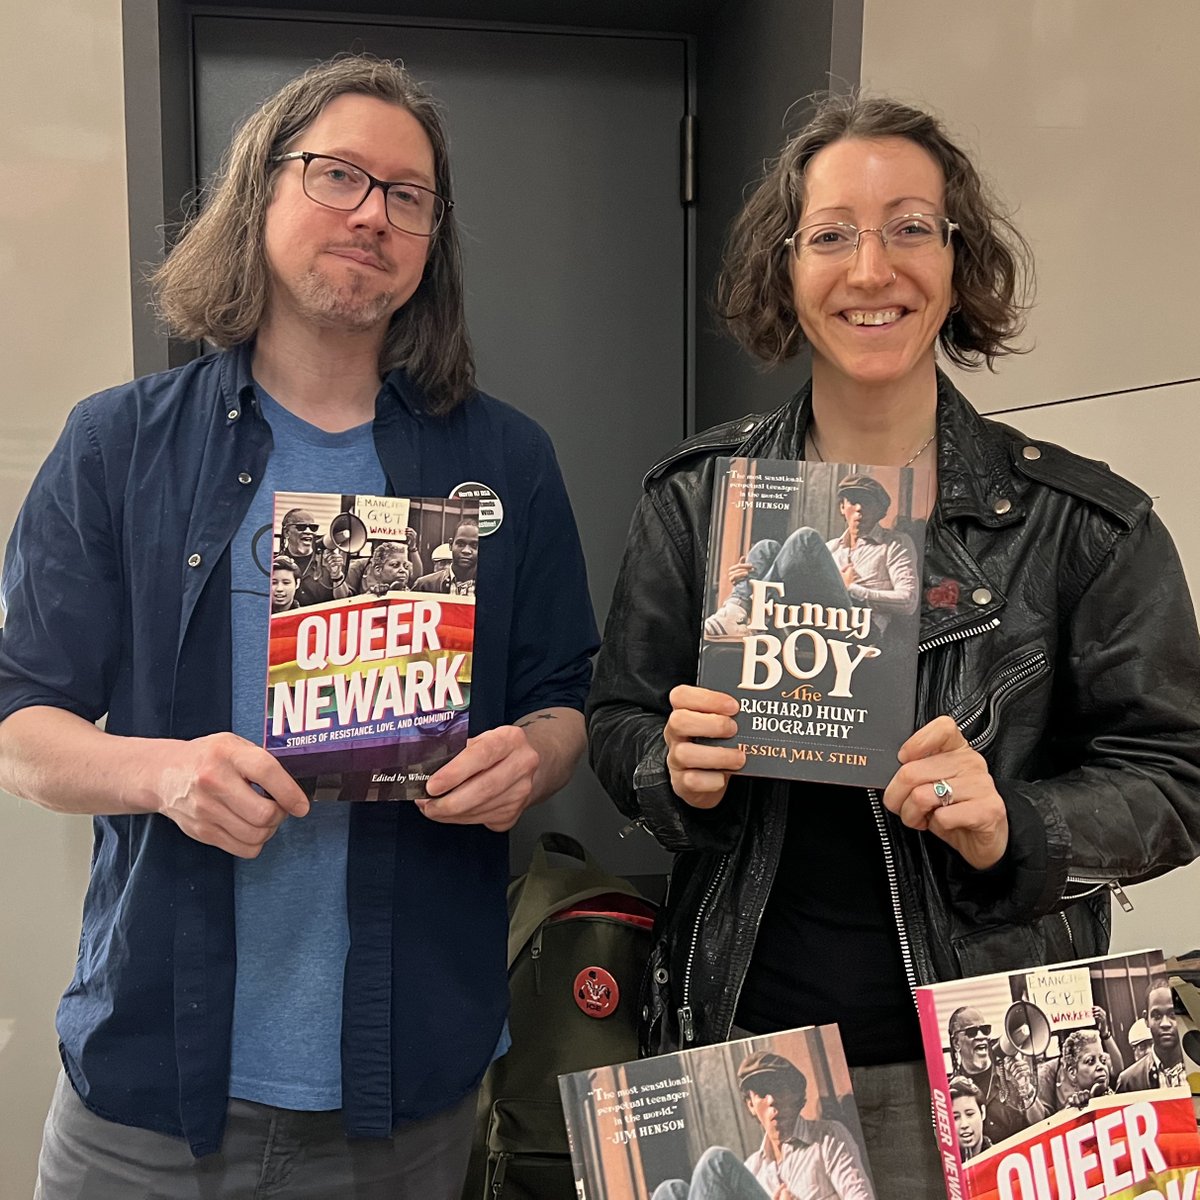 Whitney Strub, editor of 'Queer Newark: Stories of Resistance, Love, and Community,' and Jessica Max Stein, author of 'Funny Boy: The Richard Hunt Biography,' at our exhibit table at the Rainbow Book Fair. rutgersuniversitypress.org/queer-newark/9… rutgersuniversitypress.org/funny-boy/9781… #RainbowBookFair #LGBTQ